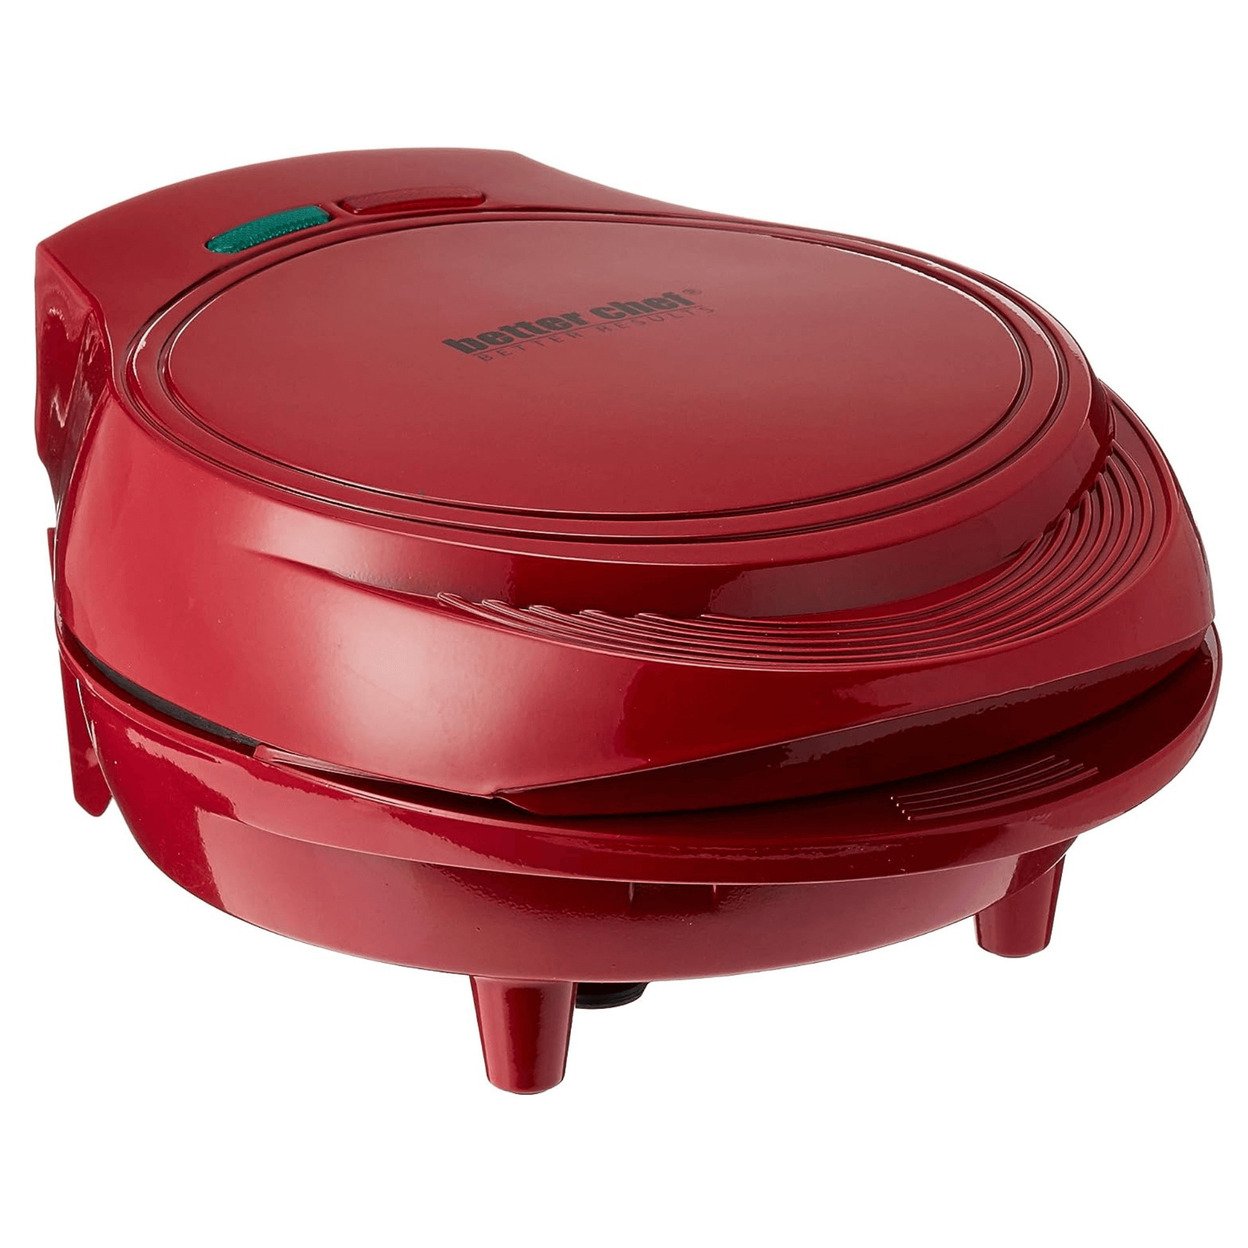 Better Chef Electric Double Omelet Maker Contact Grill in Red - image 1 of 3